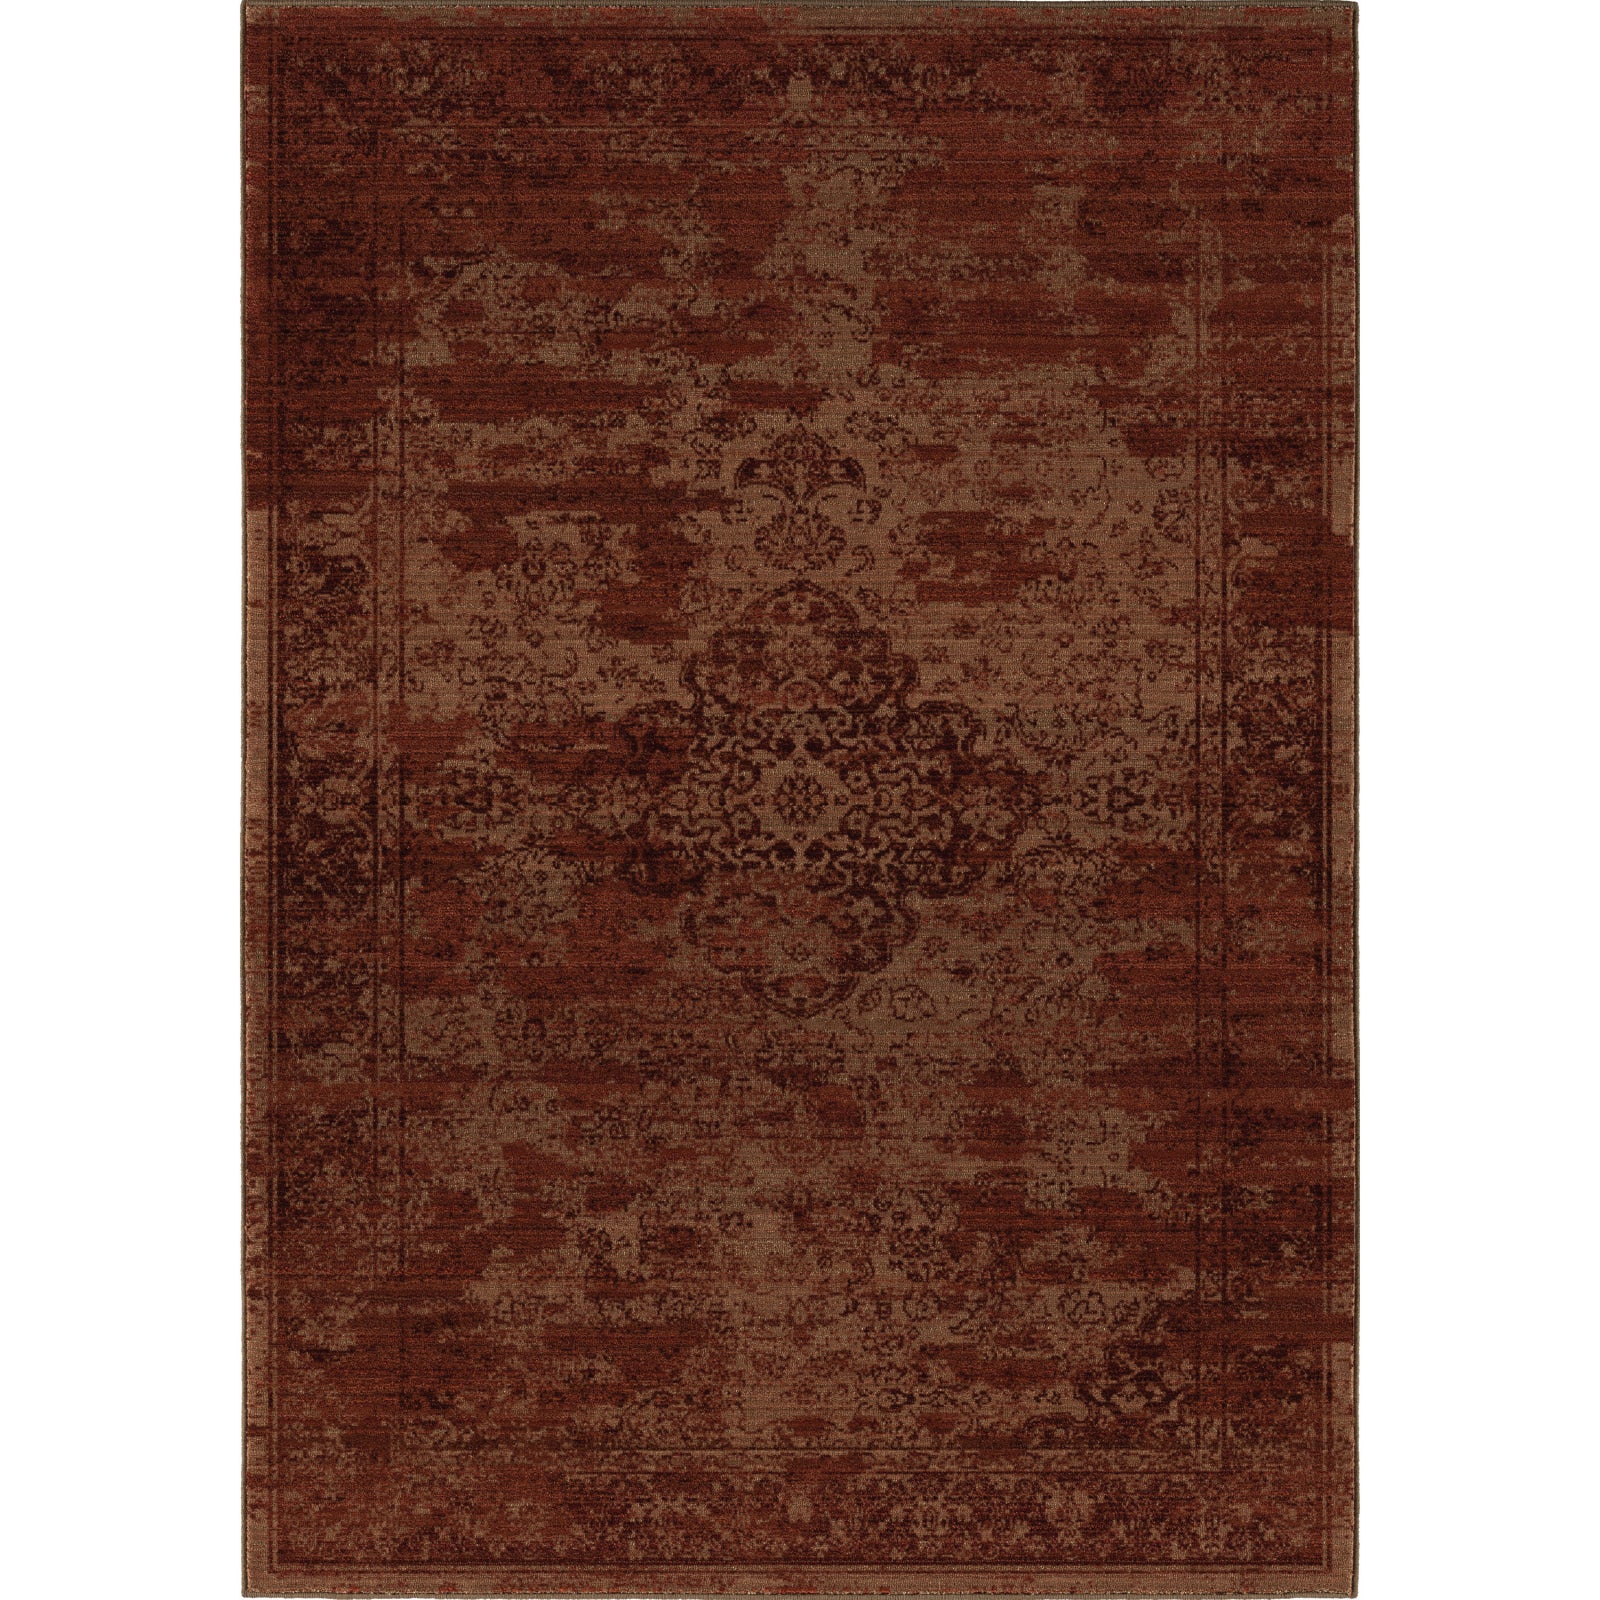 Orian Rugs Virtuous Faded Traditional Burgundy Area Rug main image